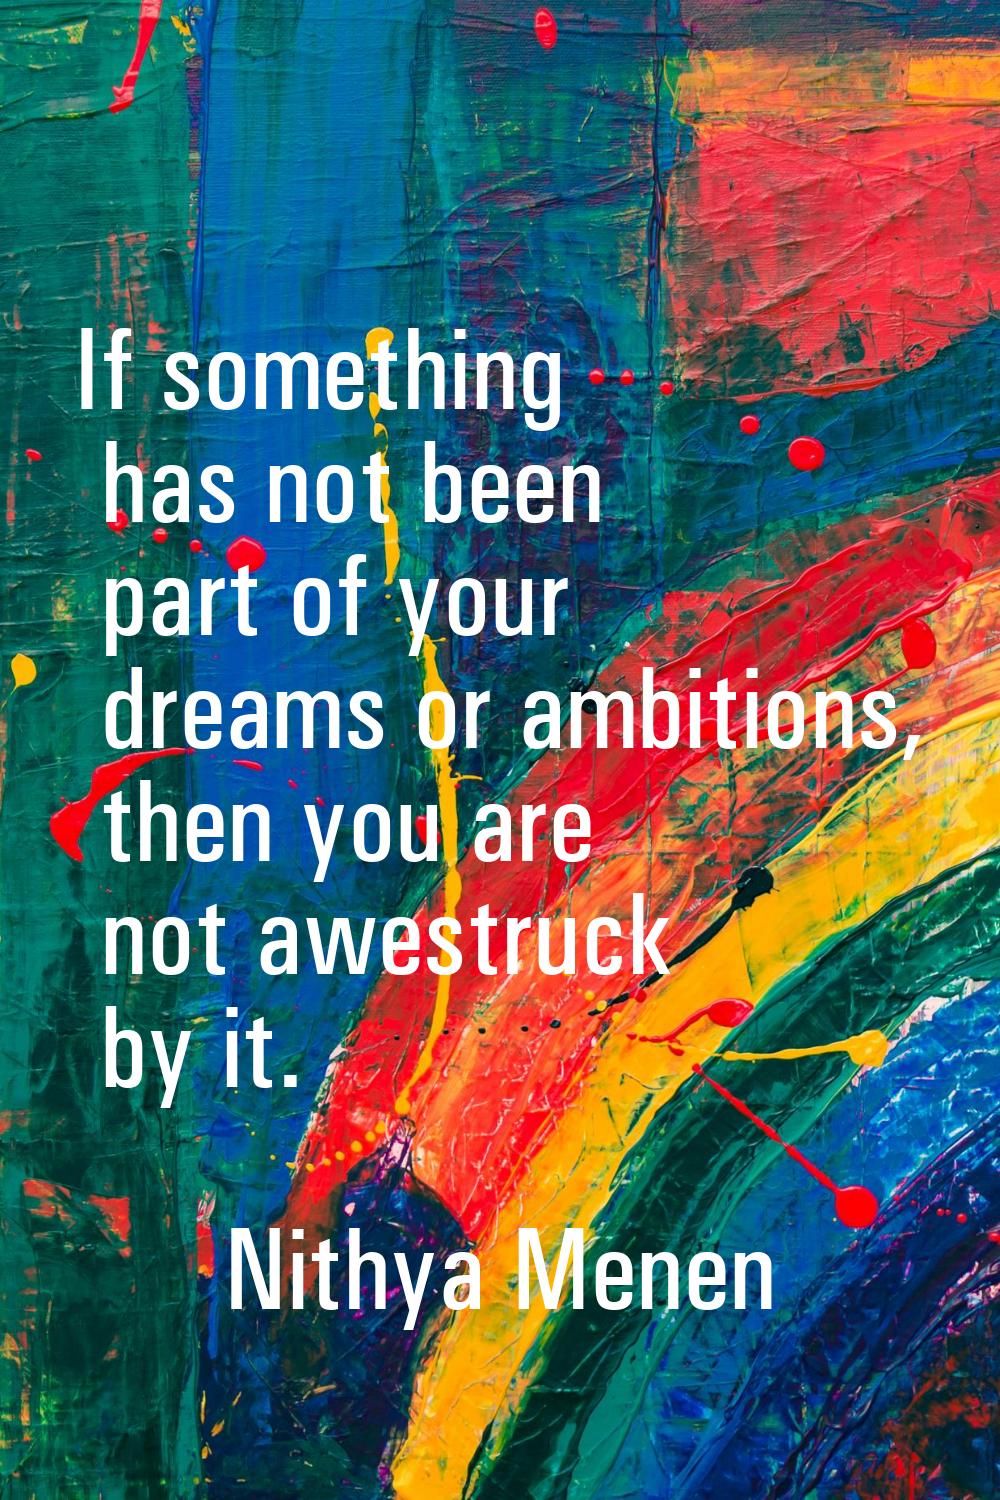 If something has not been part of your dreams or ambitions, then you are not awestruck by it.